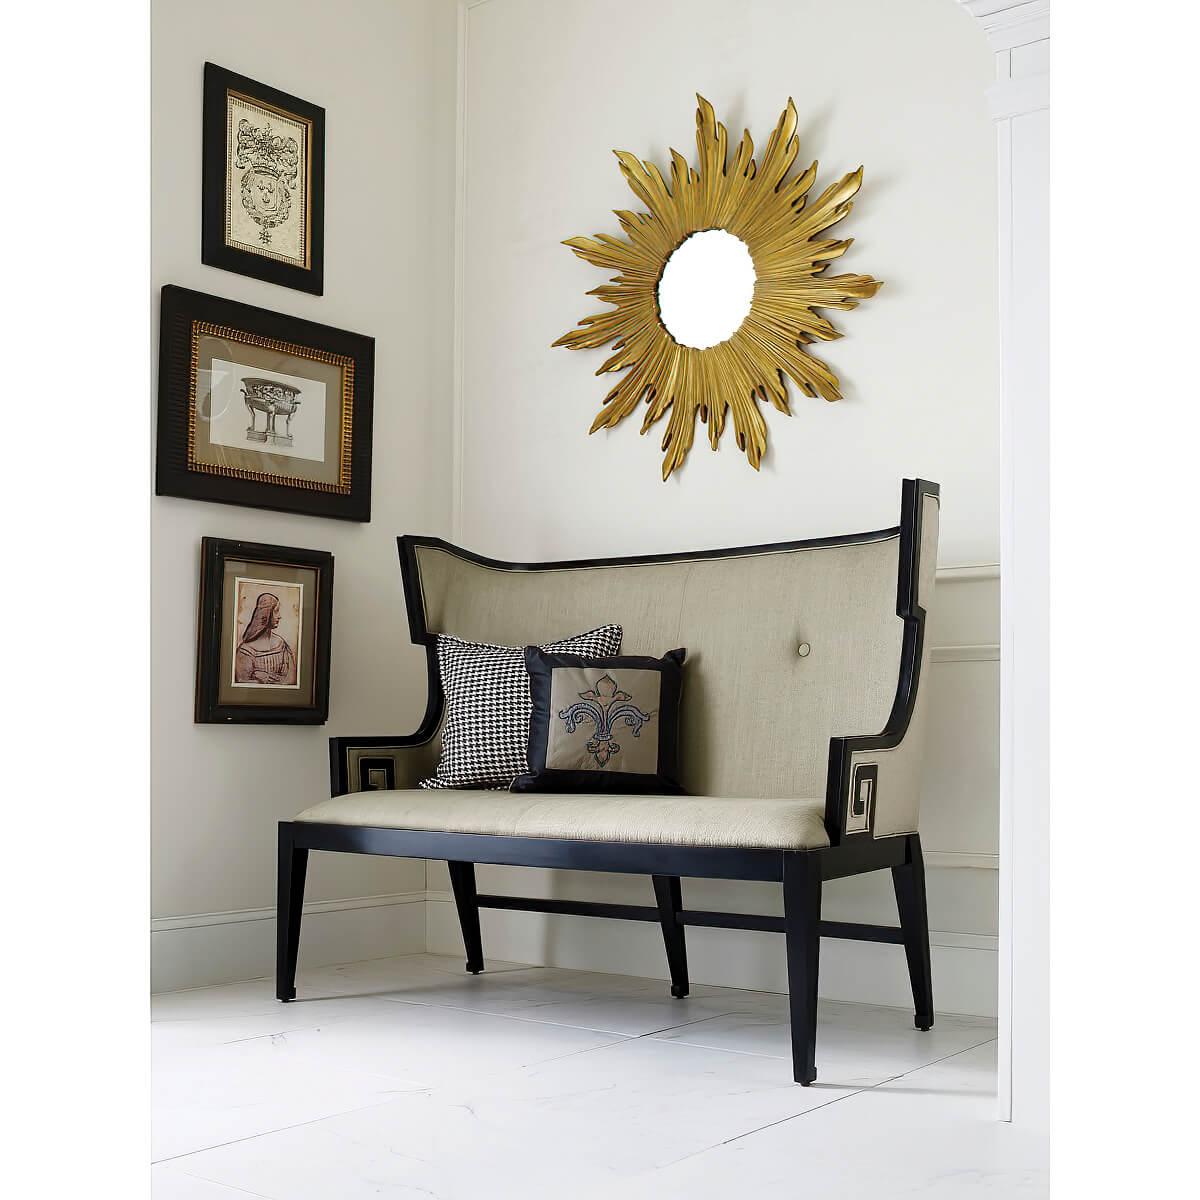 Carved Giltwood Sunburst Mirror In New Condition For Sale In Westwood, NJ